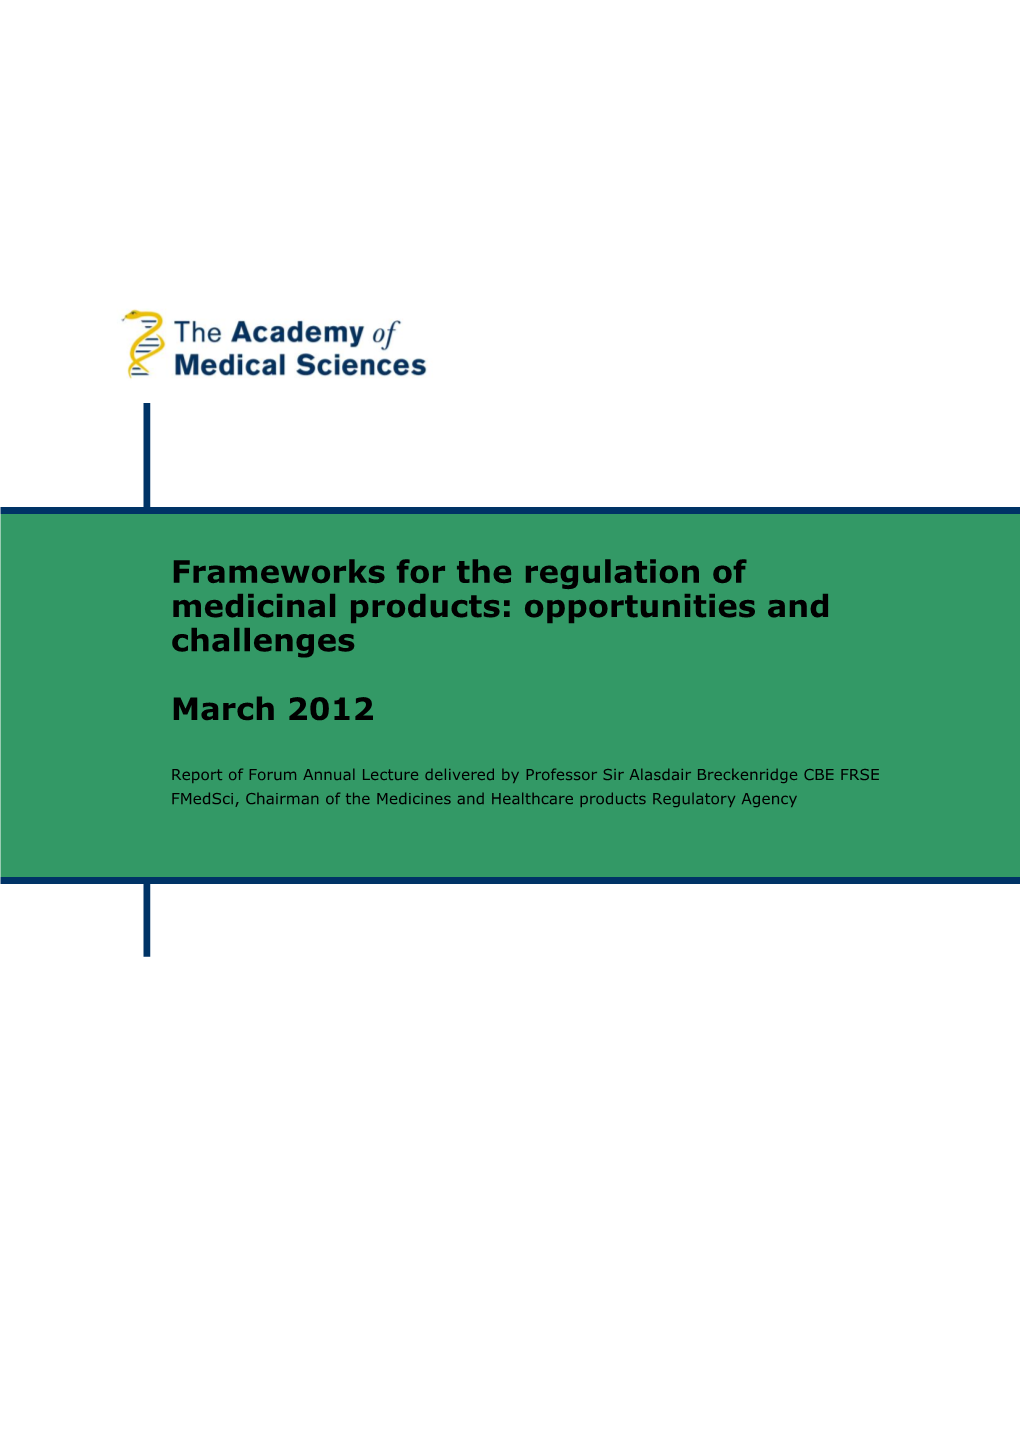 Frameworks for the Regulation of Medicinal Products: Opportunities and Challenges